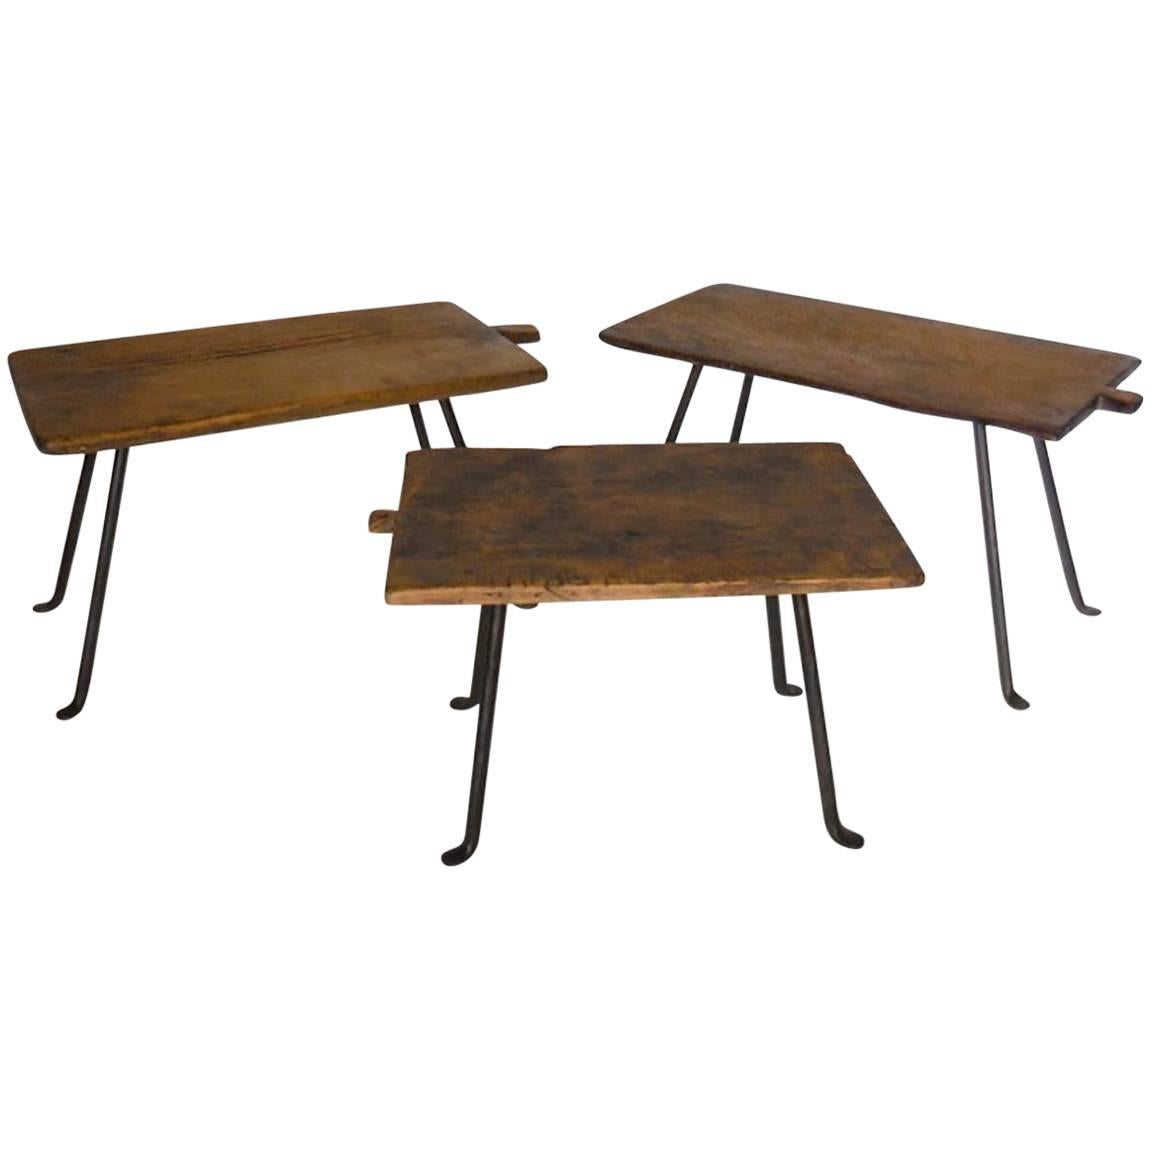 Three Antique Wooden Tray Side Tables